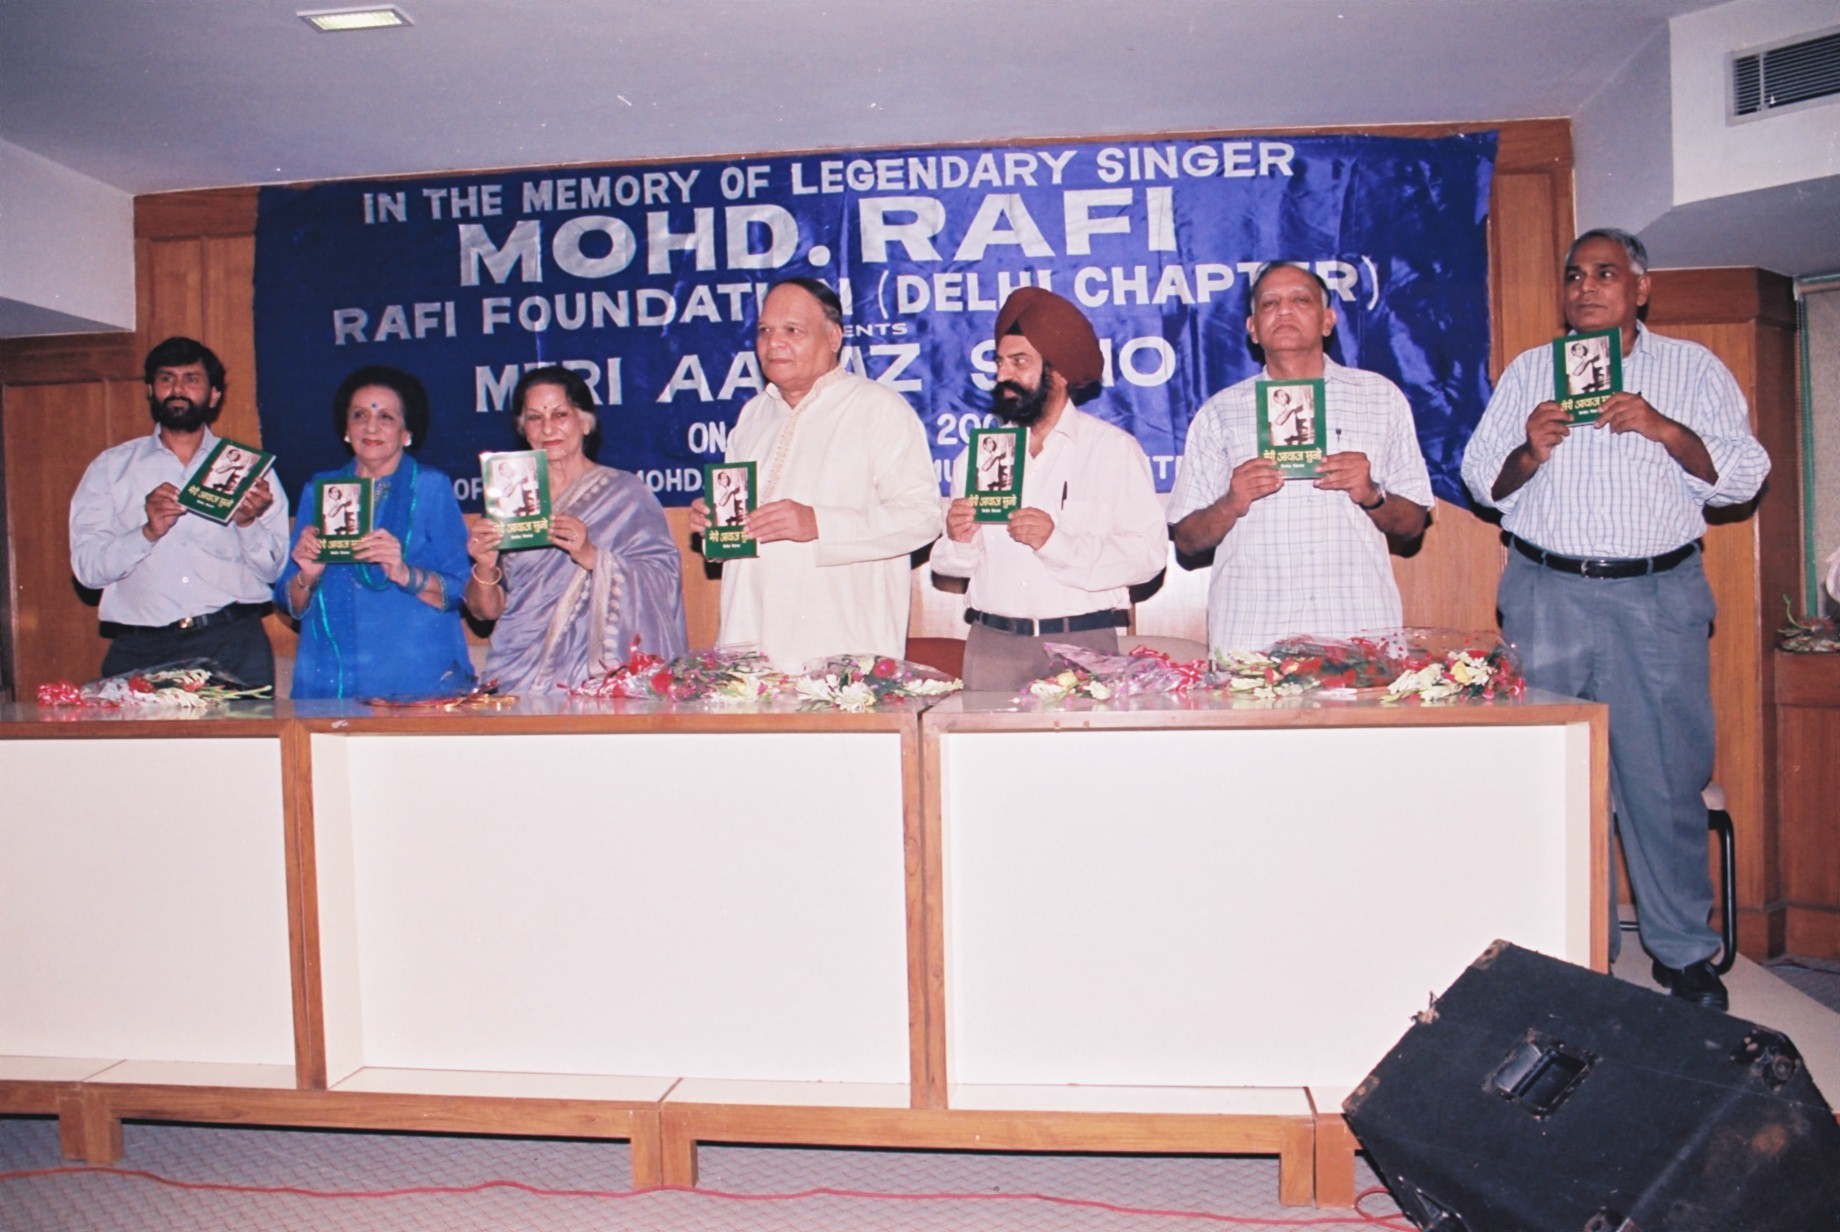 Rafi Foundation First Event - 2